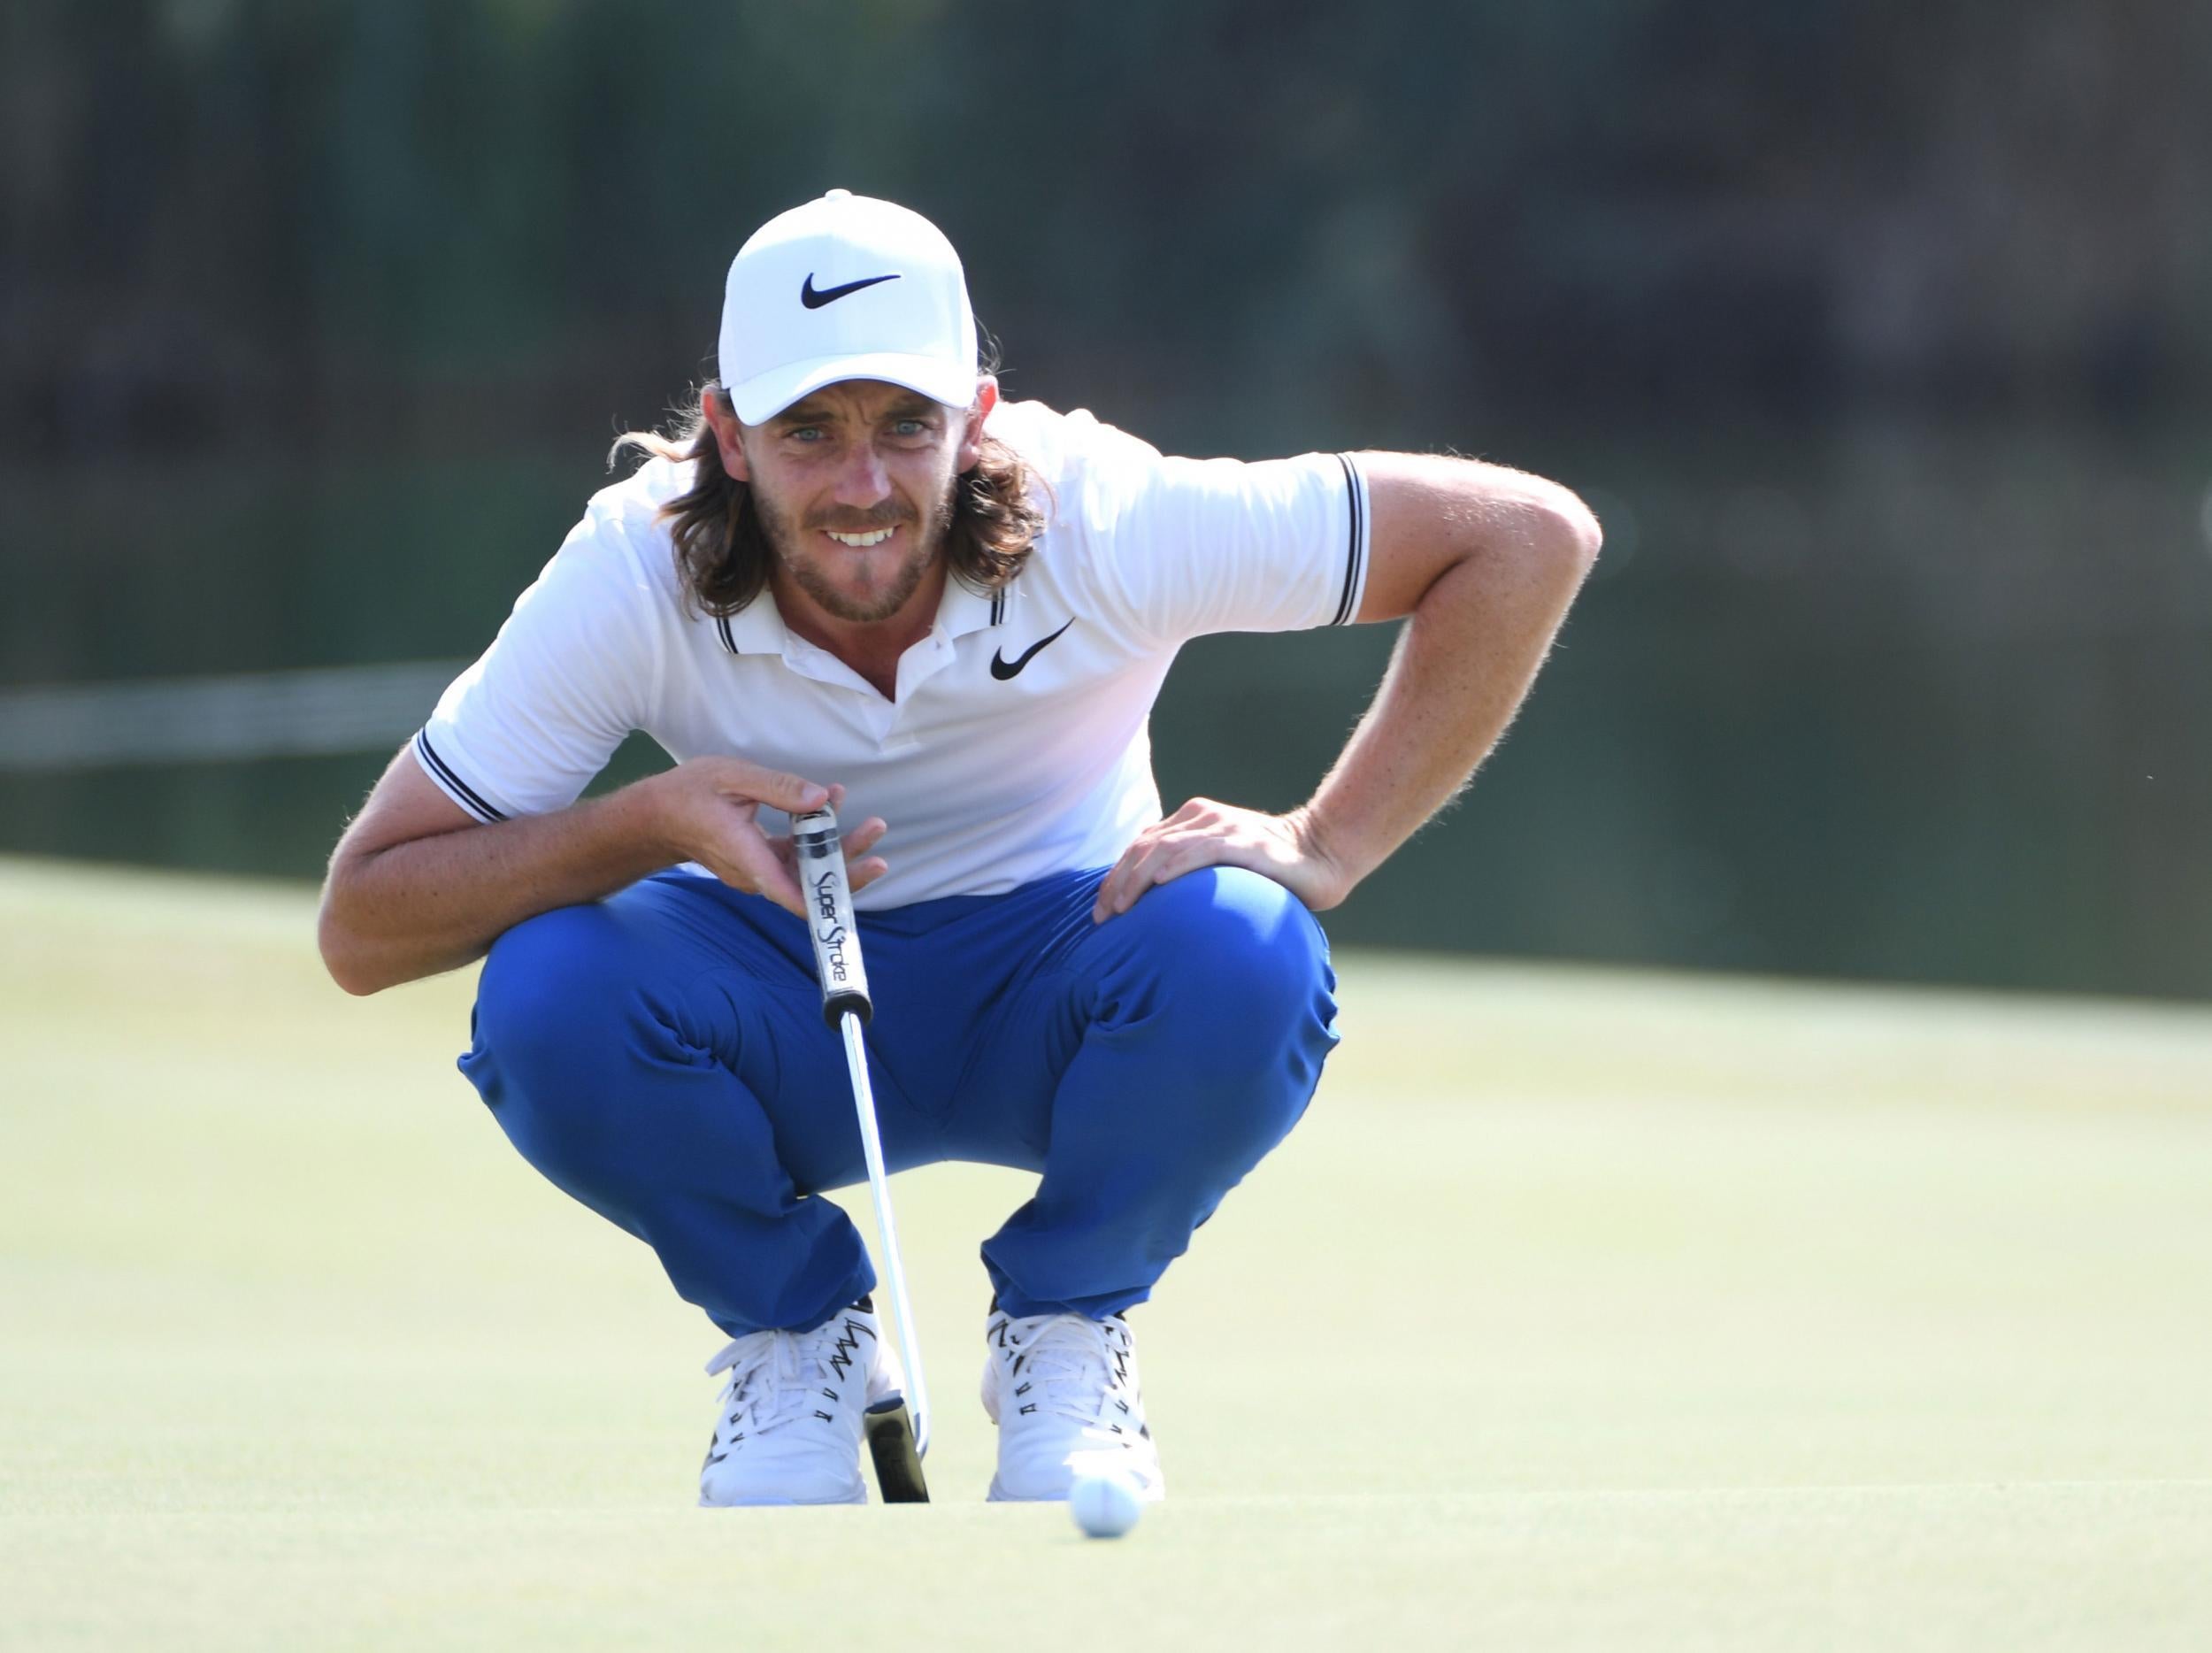 Tommy Fleetwood has battled back into contention in Dubai